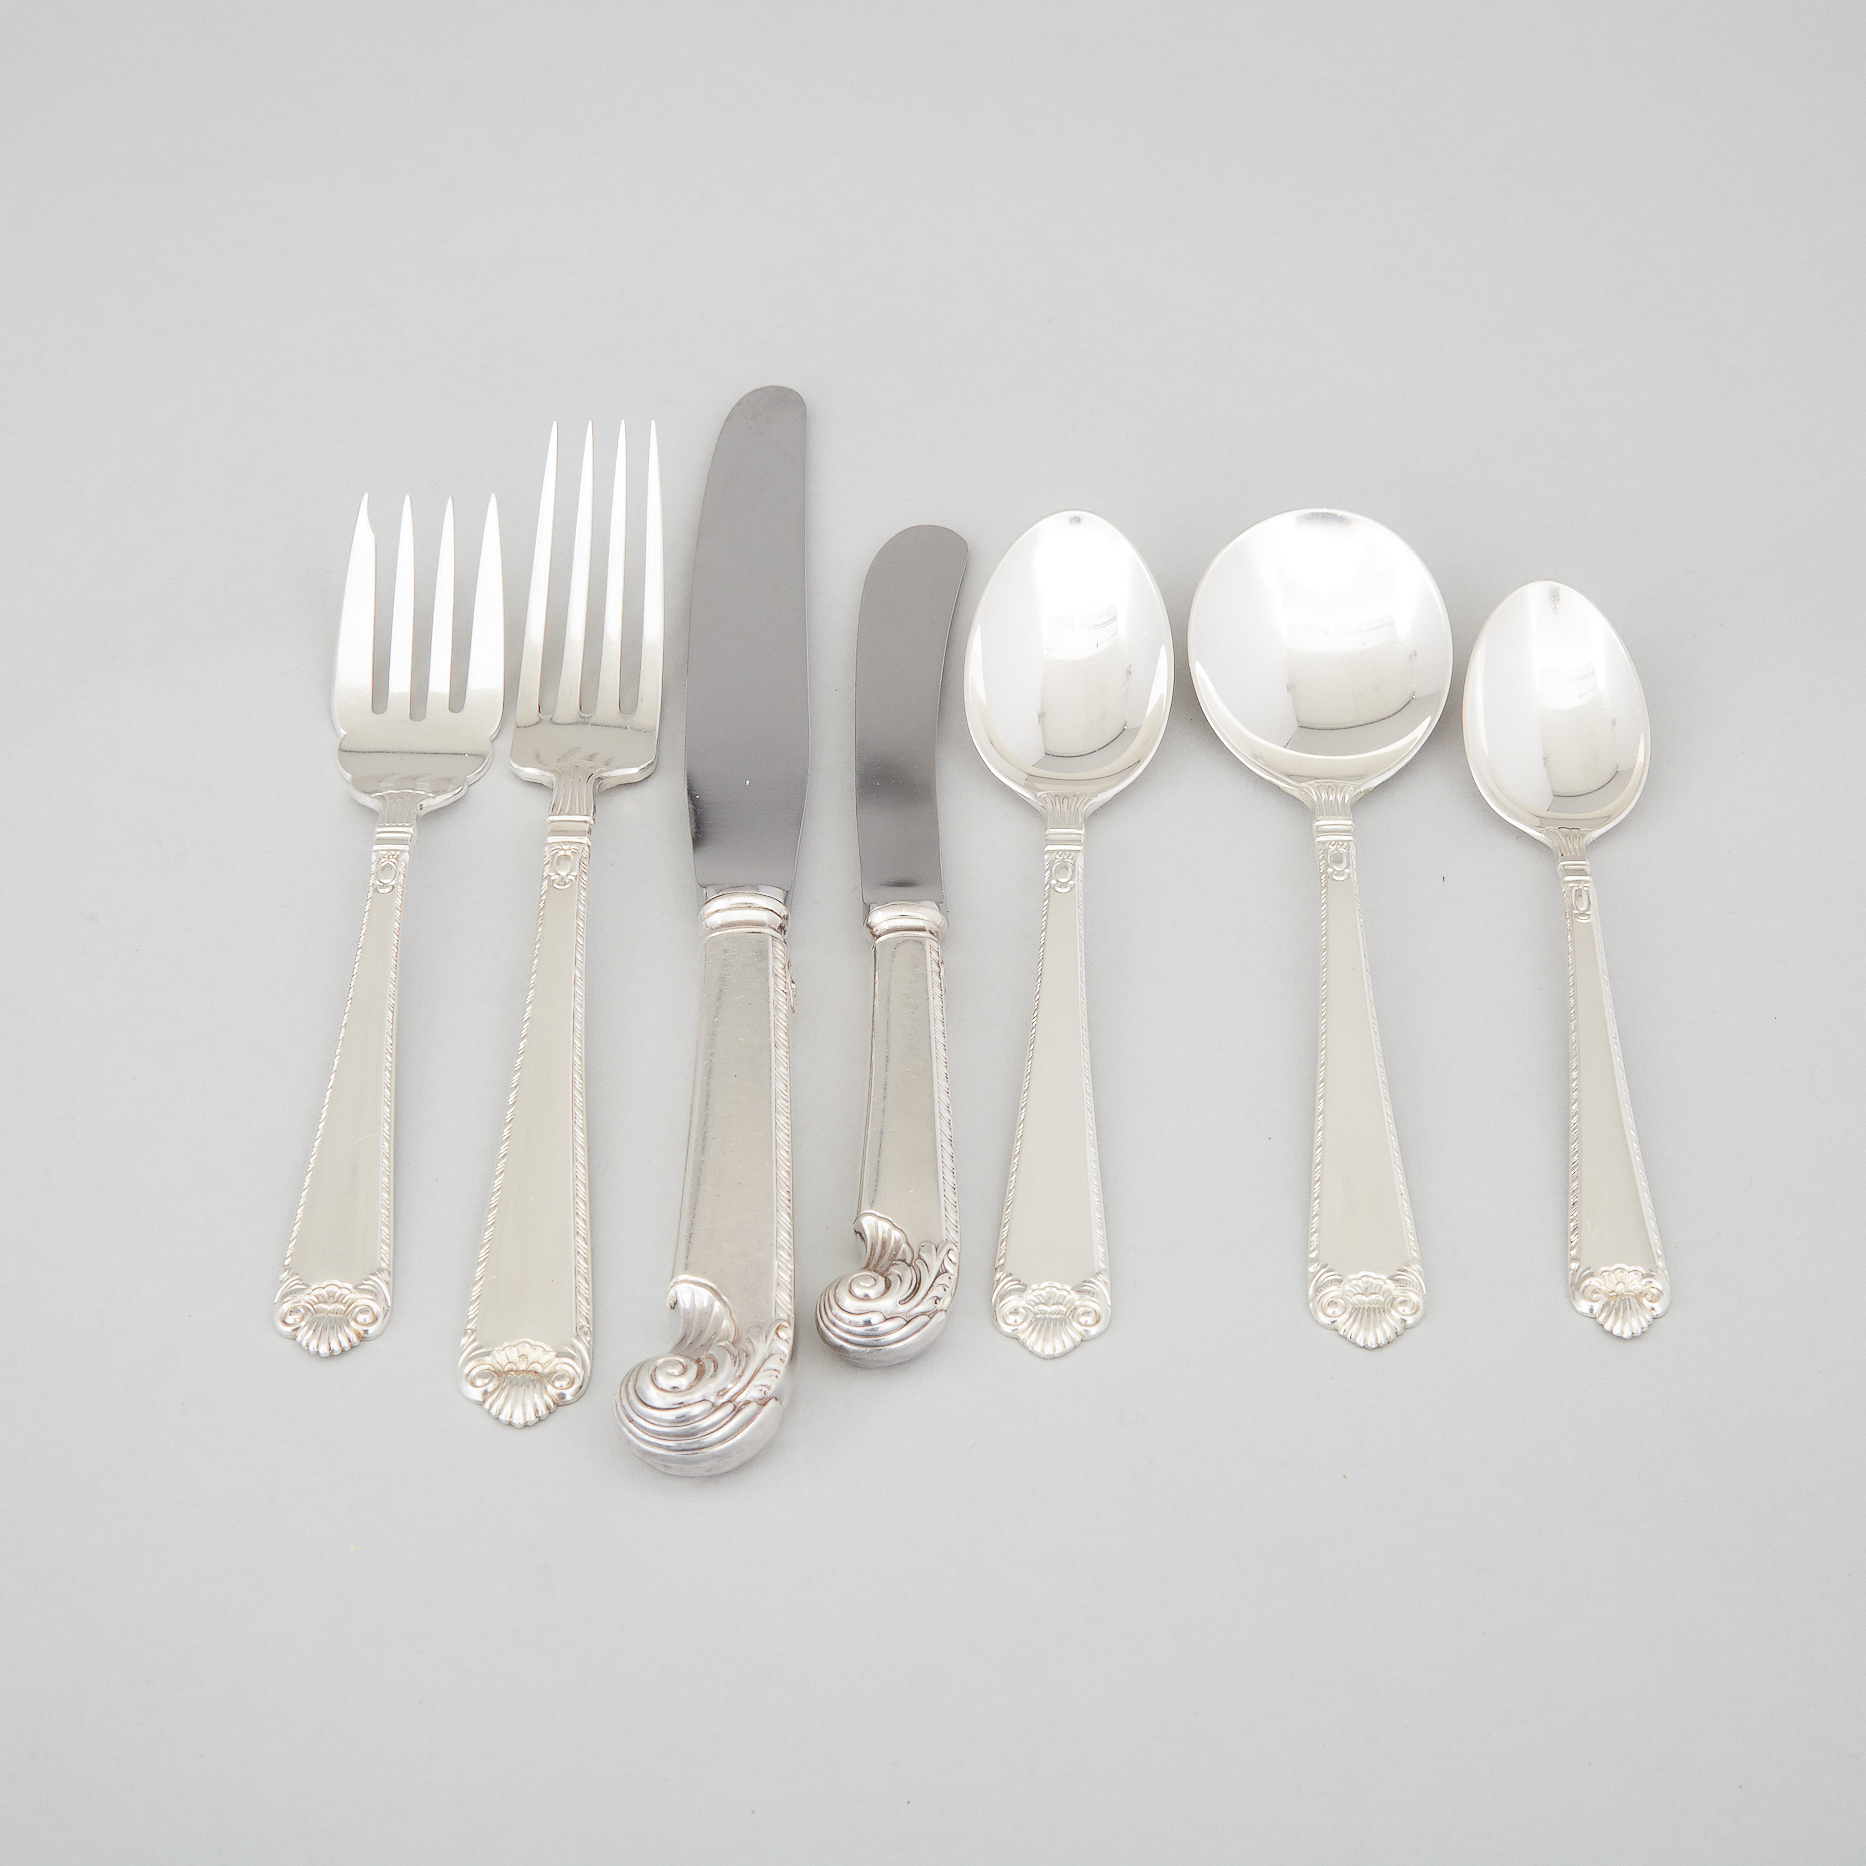 Canadian Silver 'George II Plain' Pattern Flatware Service, Henry Birks & Sons, Montreal, Que., 20th century